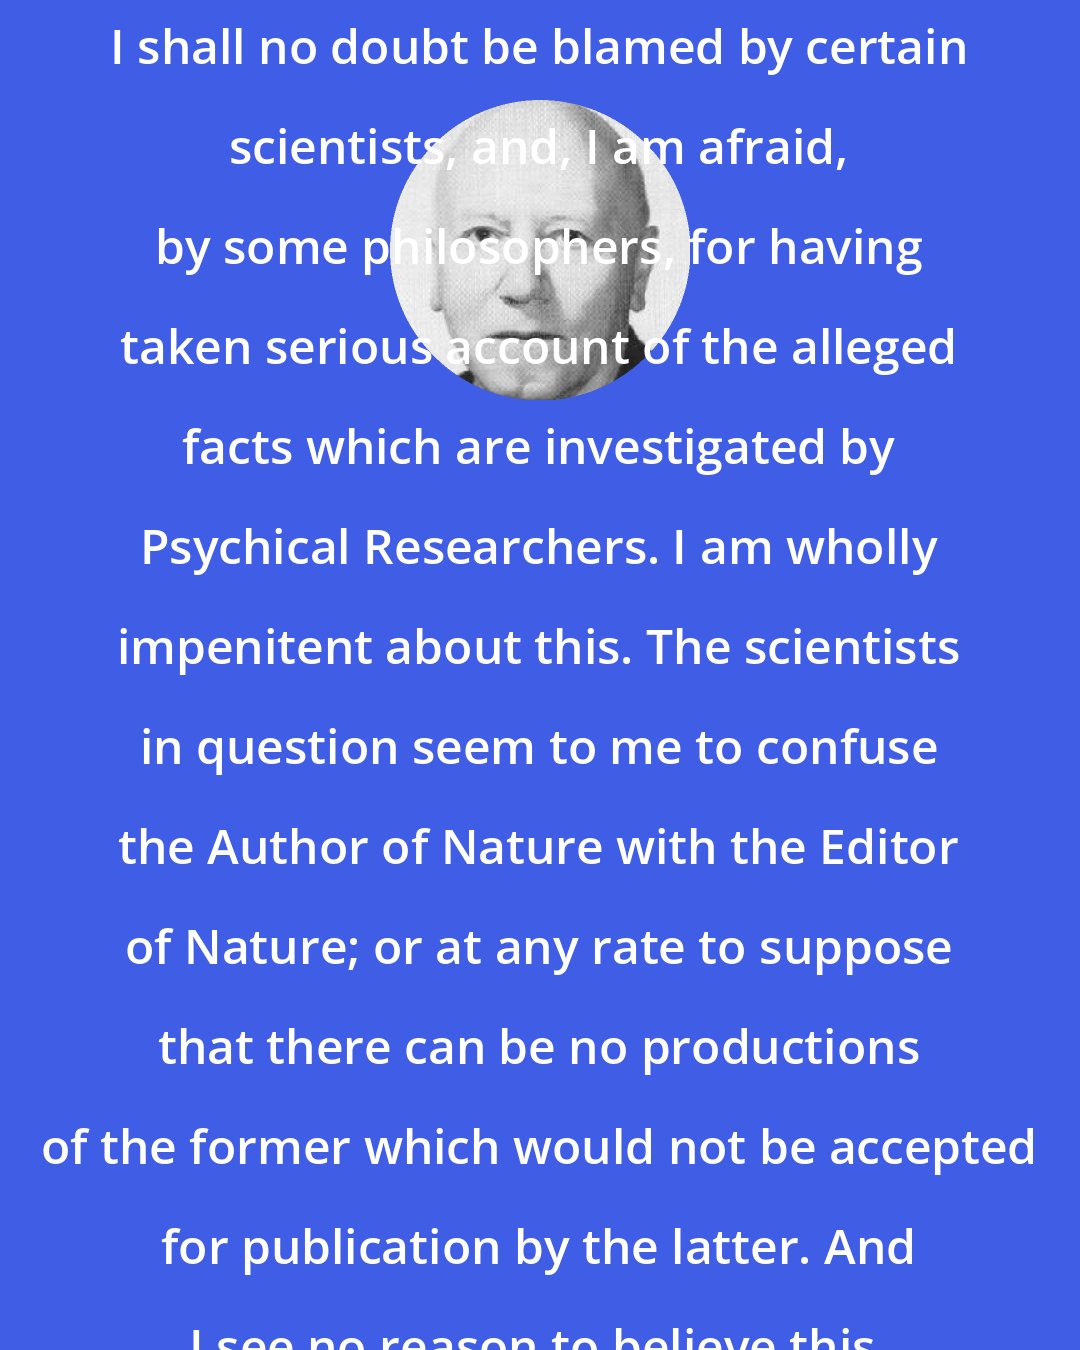 C. D. Broad: I shall no doubt be blamed by certain scientists, and, I am afraid, by some philosophers, for having taken serious account of the alleged facts which are investigated by Psychical Researchers. I am wholly impenitent about this. The scientists in question seem to me to confuse the Author of Nature with the Editor of Nature; or at any rate to suppose that there can be no productions of the former which would not be accepted for publication by the latter. And I see no reason to believe this.